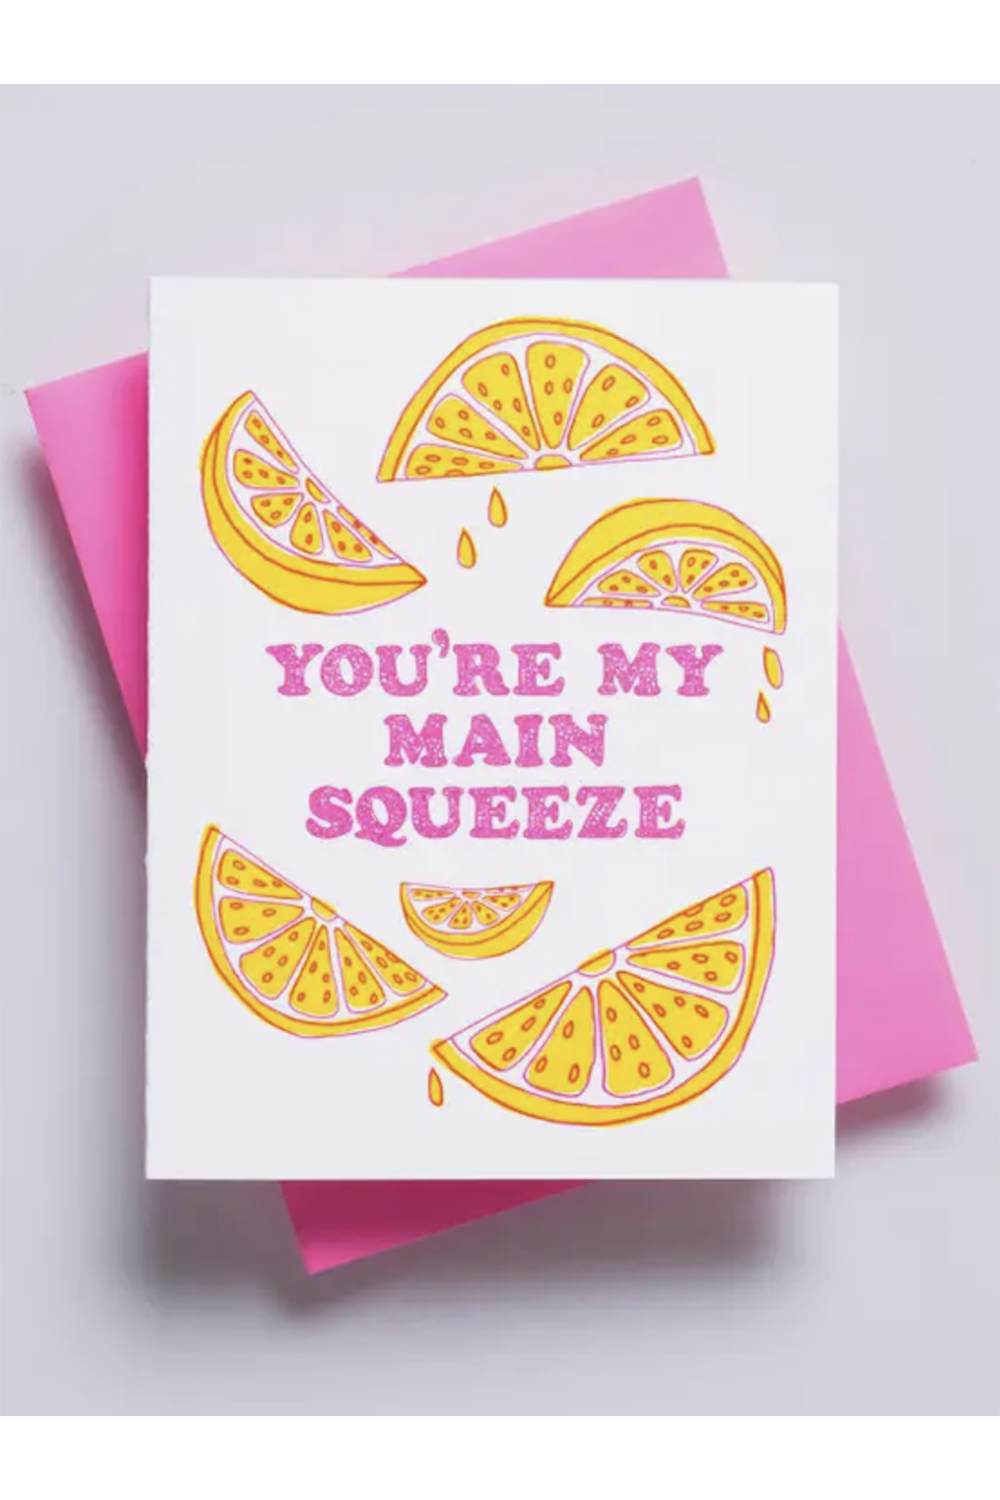 Richie Single Valentine's Day Card - Main Squeeze